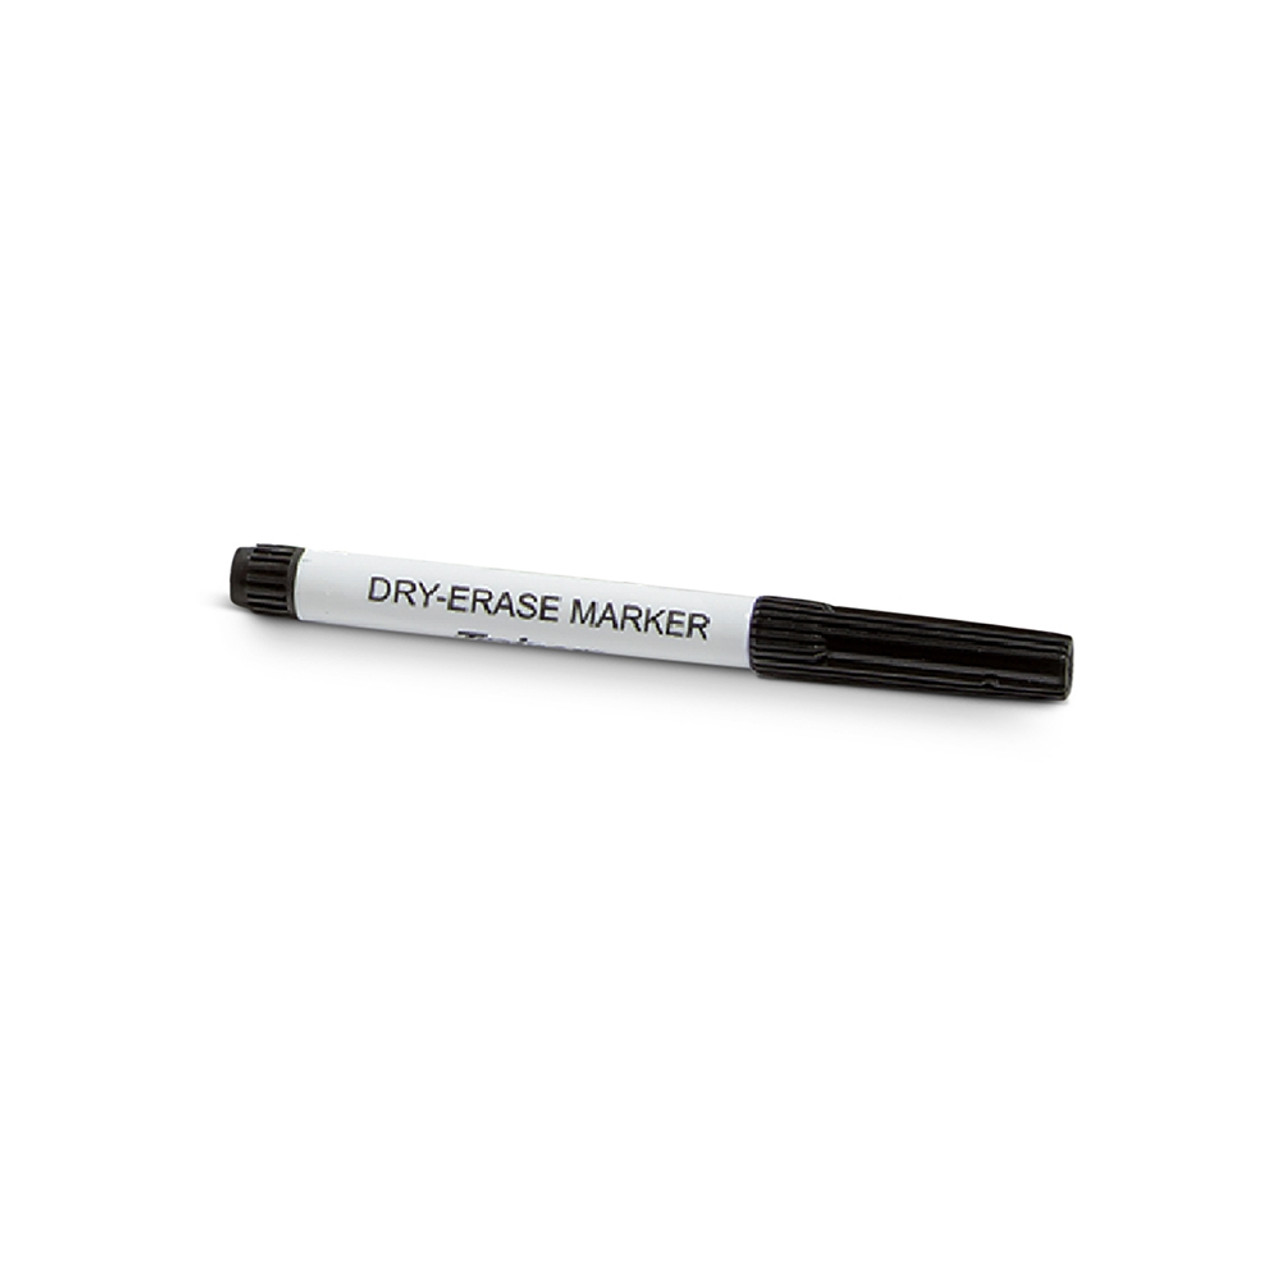 7 Best Markers for Black Dry Erase Board Reviewed in 2023